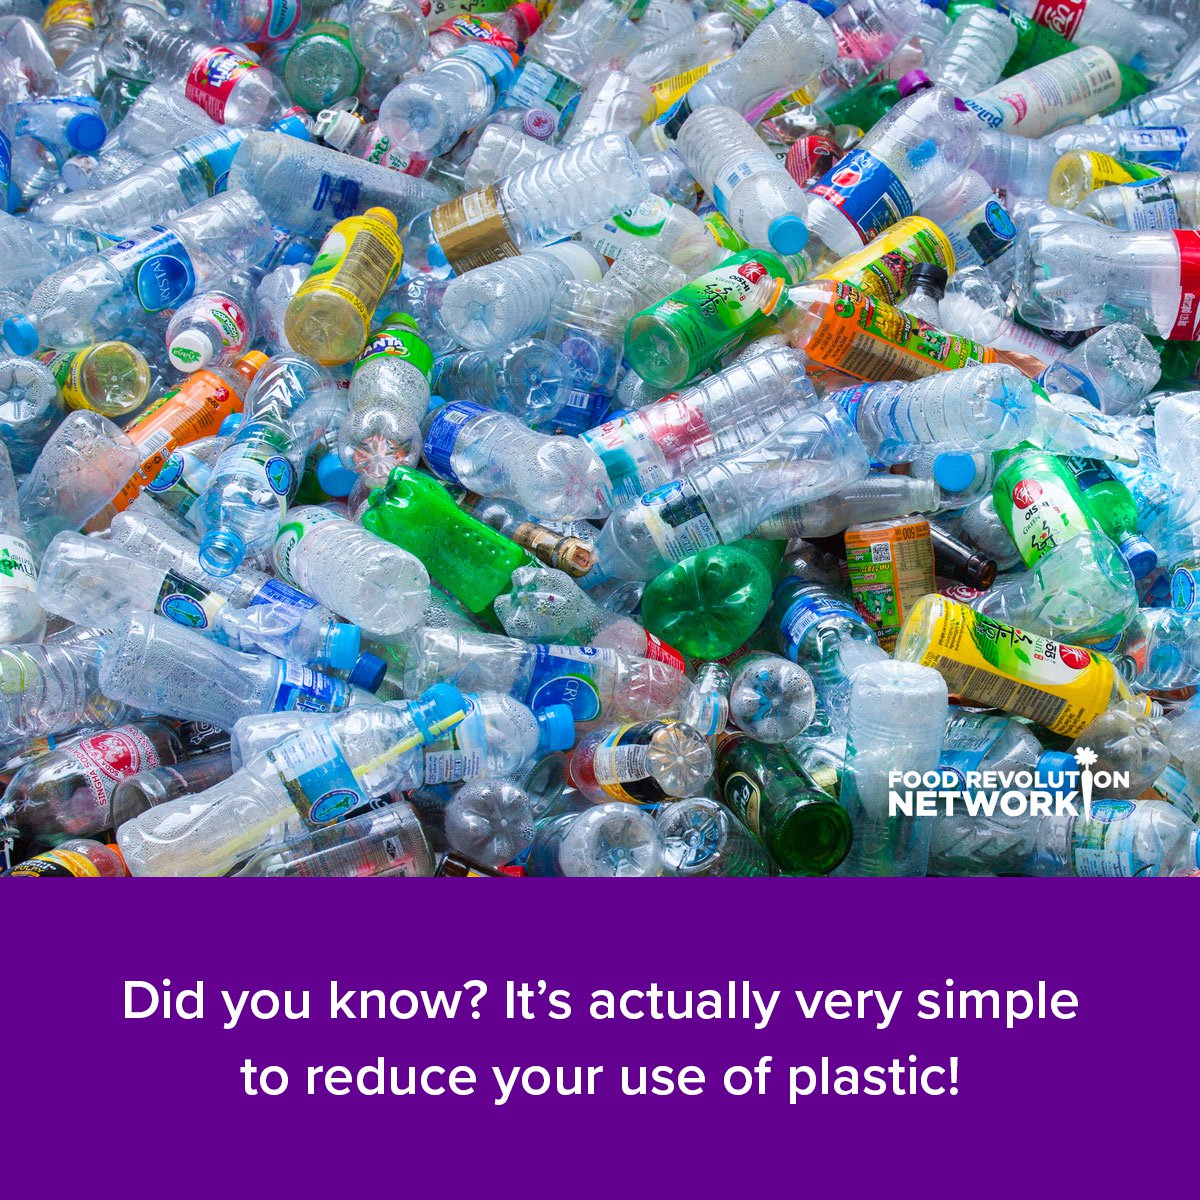 Did you know? It's actually very simple to reduce your use of plastic!